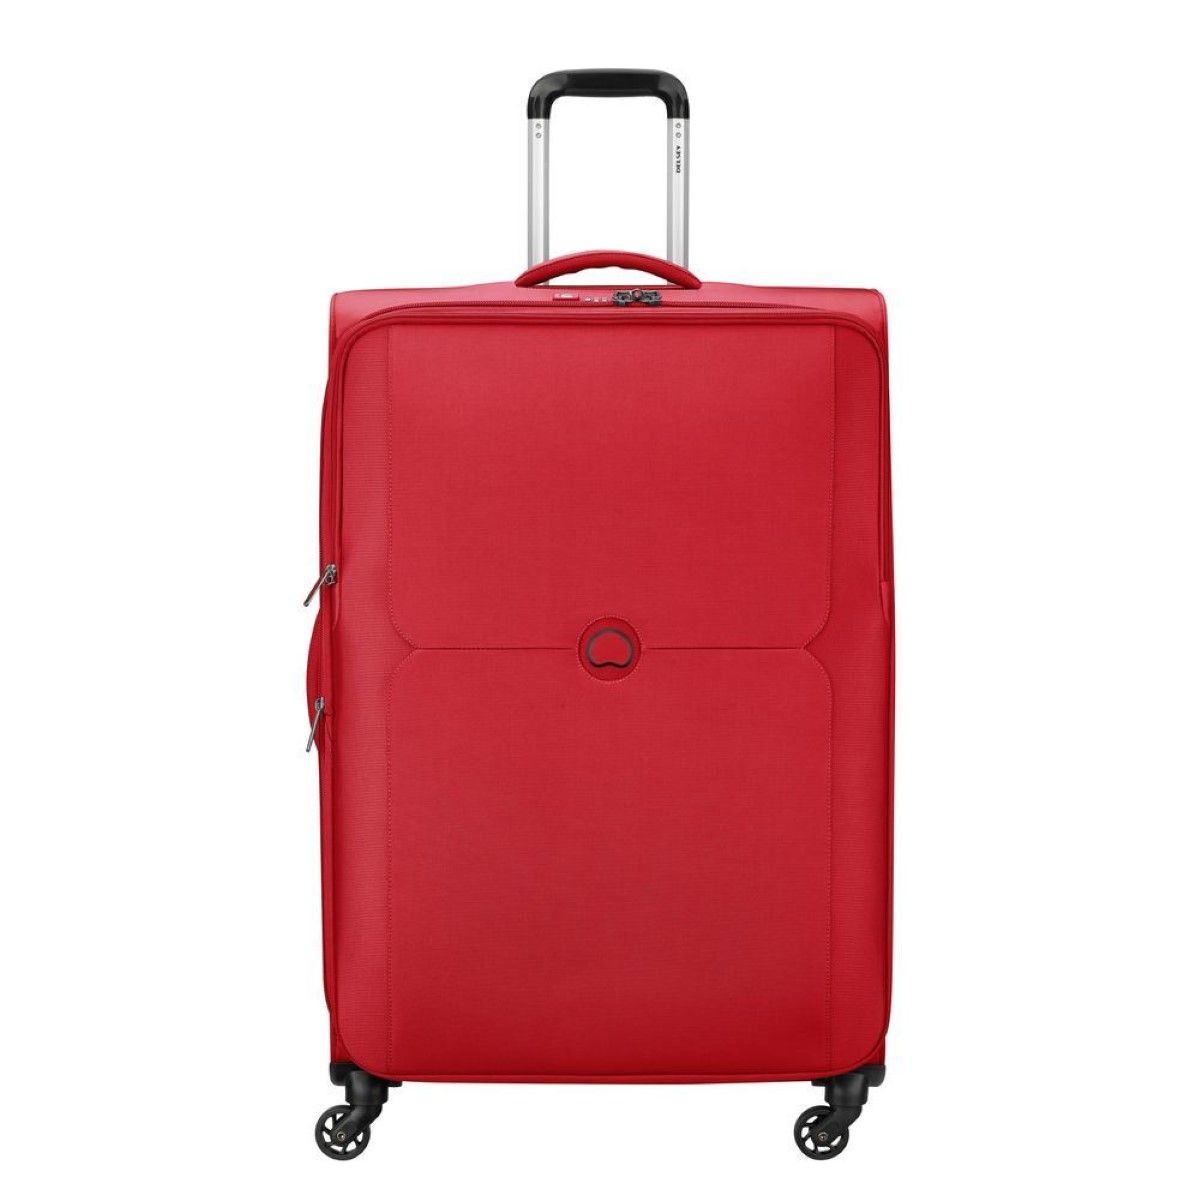 Expandable Large Trolley Mercure 78 cm Delsey, spacious and light softcase luggage with four wheels, double tube telescopic handle, zipped compartment, TSA combination lock, front pocket, and side handles.